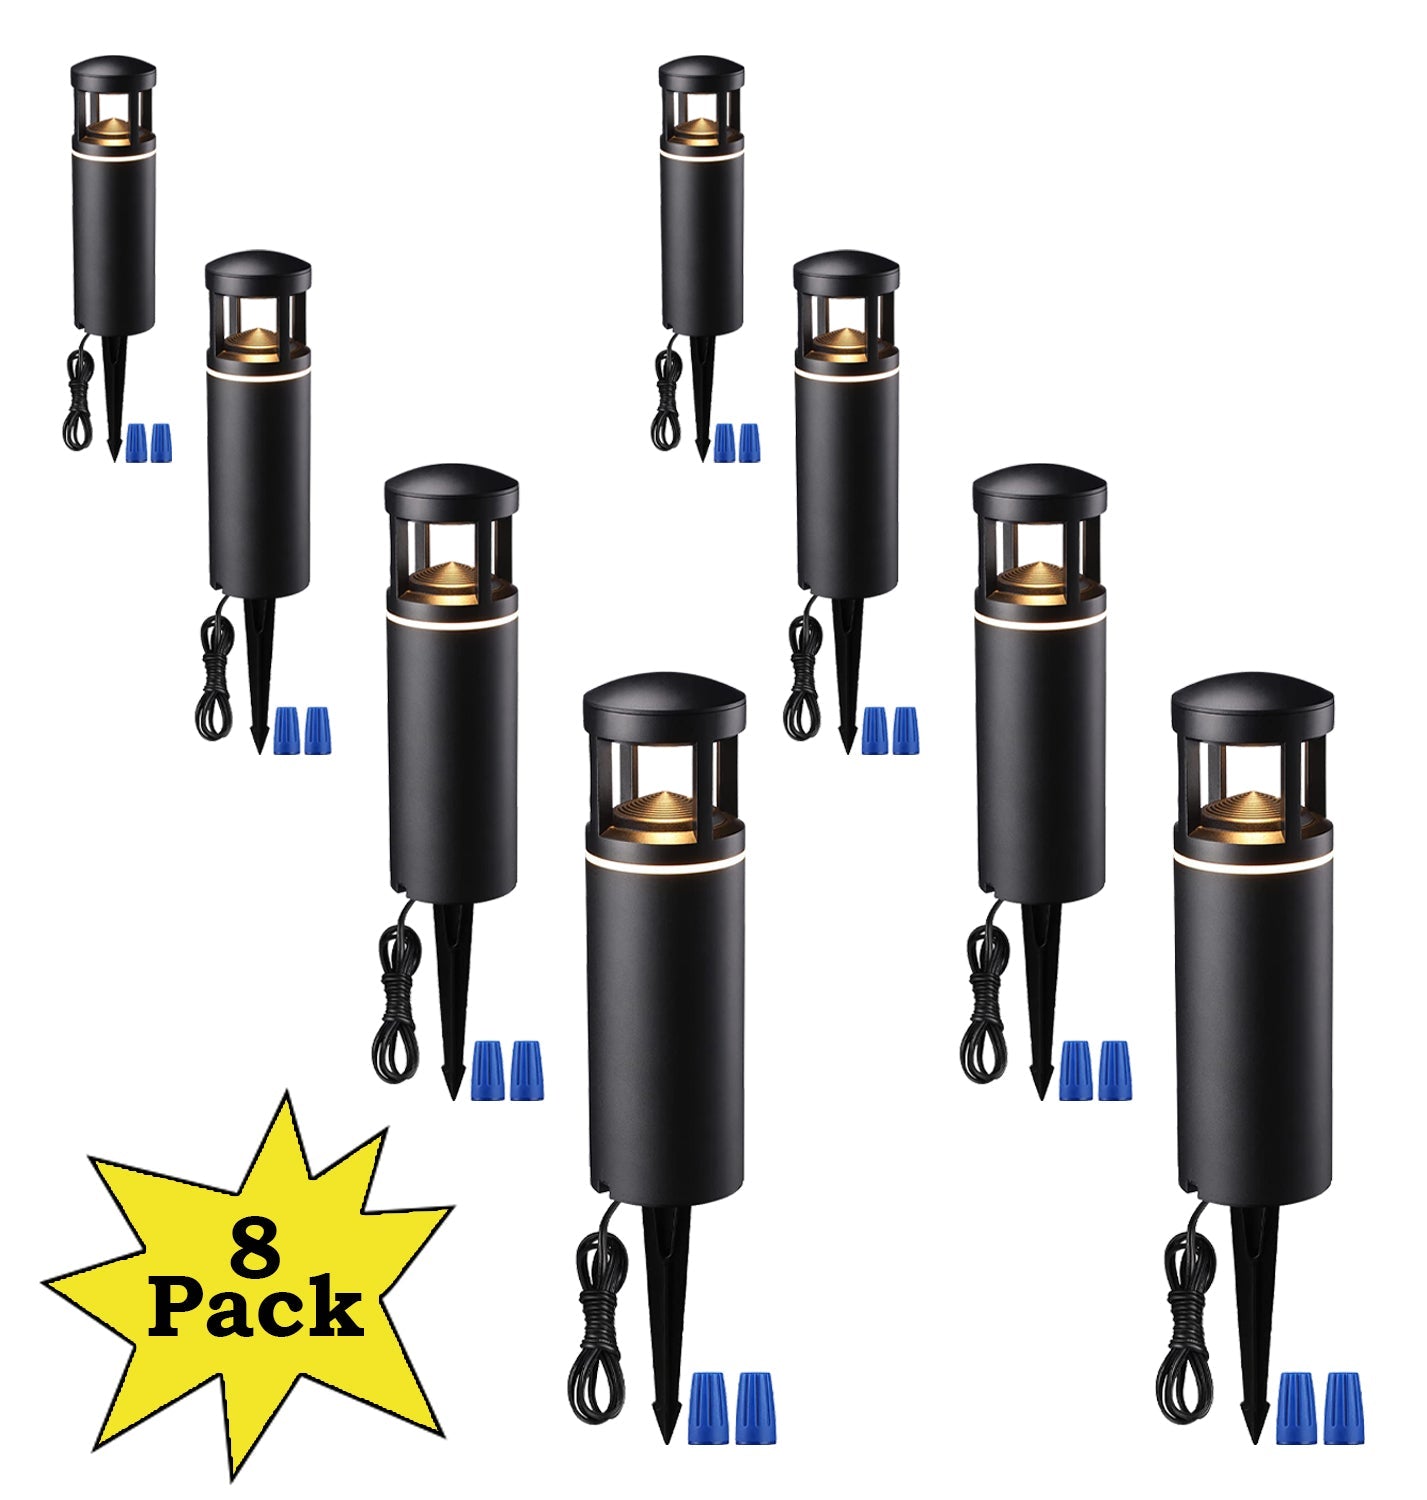 ALP59 8-Pack LED Low Voltage Pathway Lights, Outdoor Landscape Lighting, Aluminum Housing, 5W 12V AC/DC Path Lights for Driveway, Garden, Lawn, IP65 Waterproof, 3000K Warm White